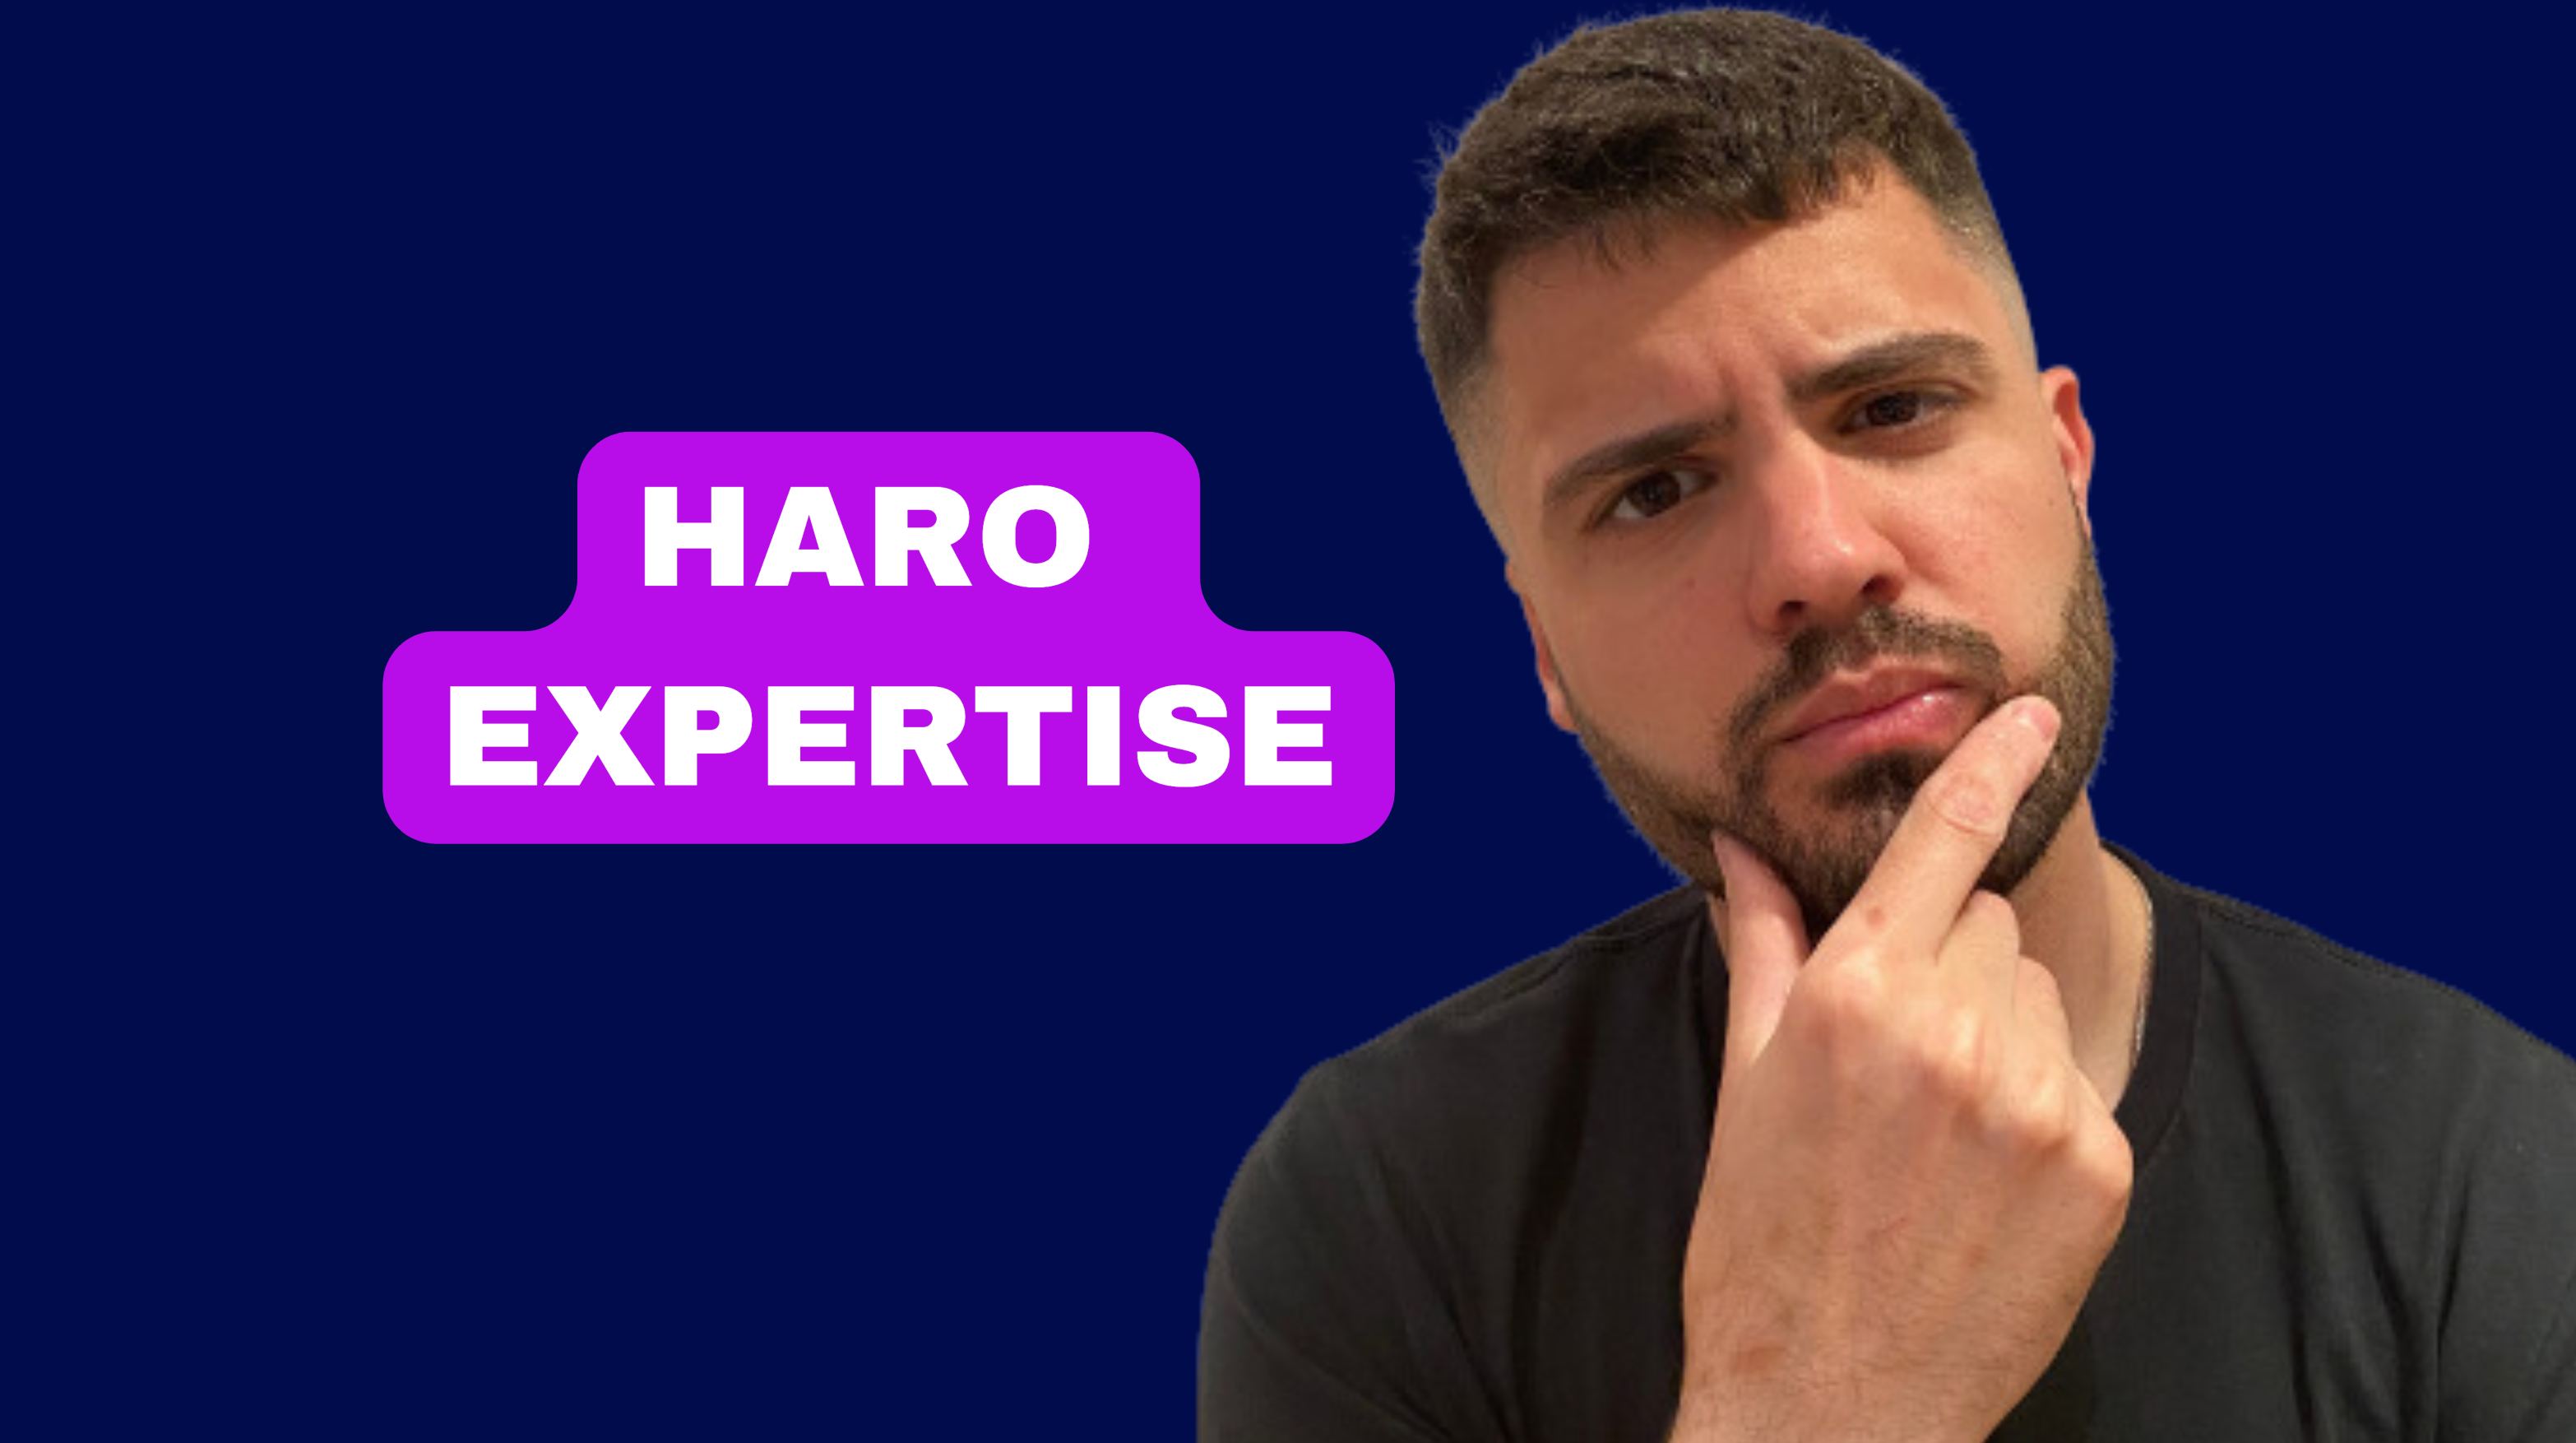 HARO Expertise and Experience